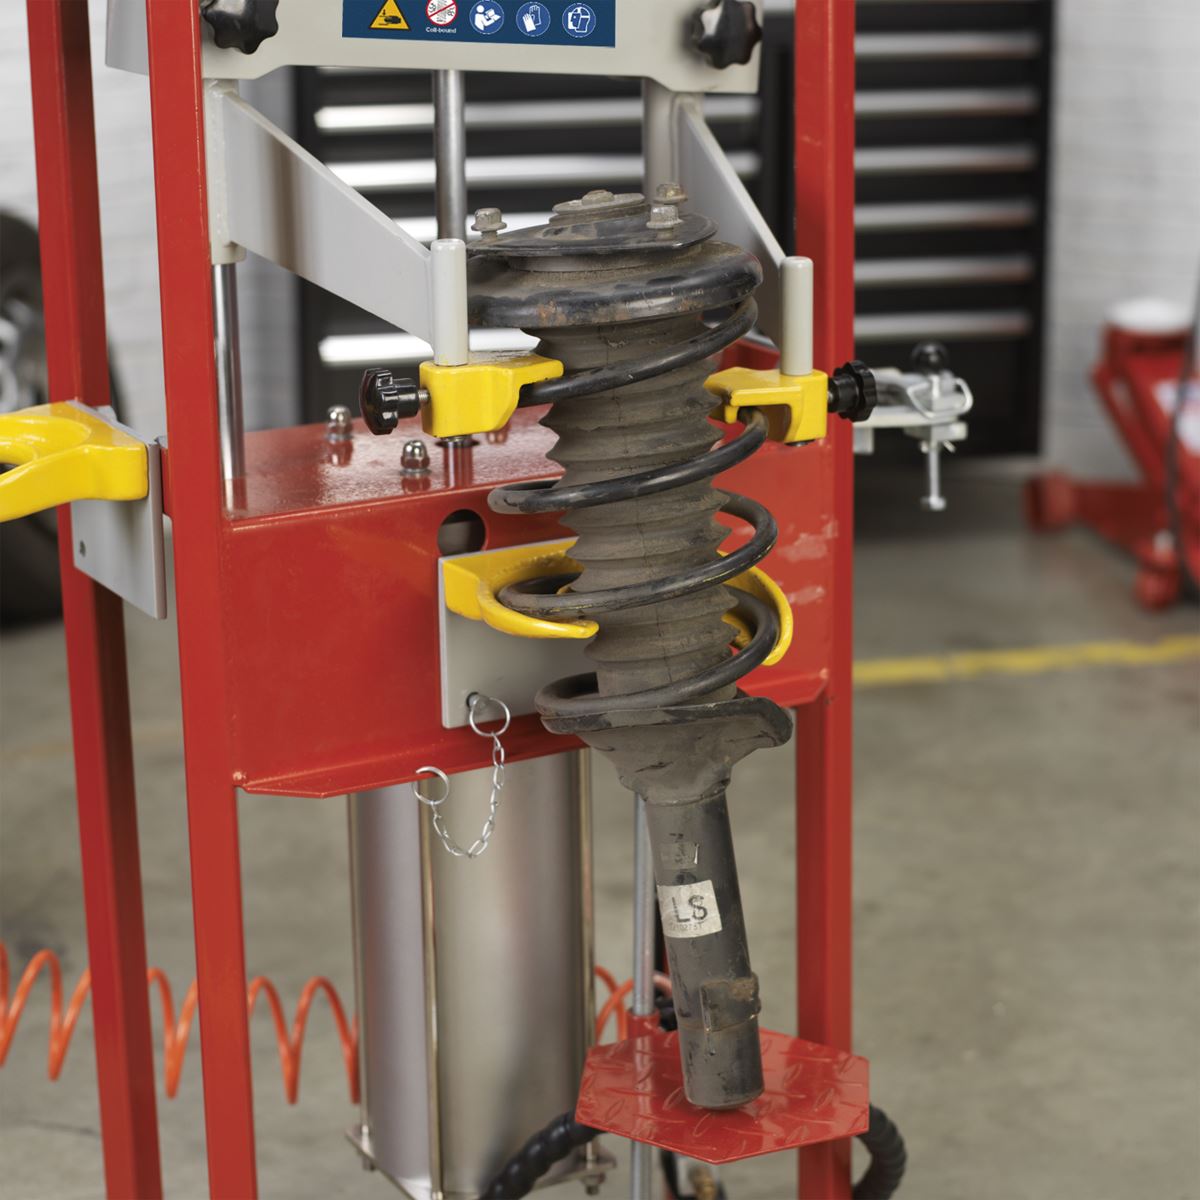 Sealey Coil Spring Compressor - Air Operated 1000kg